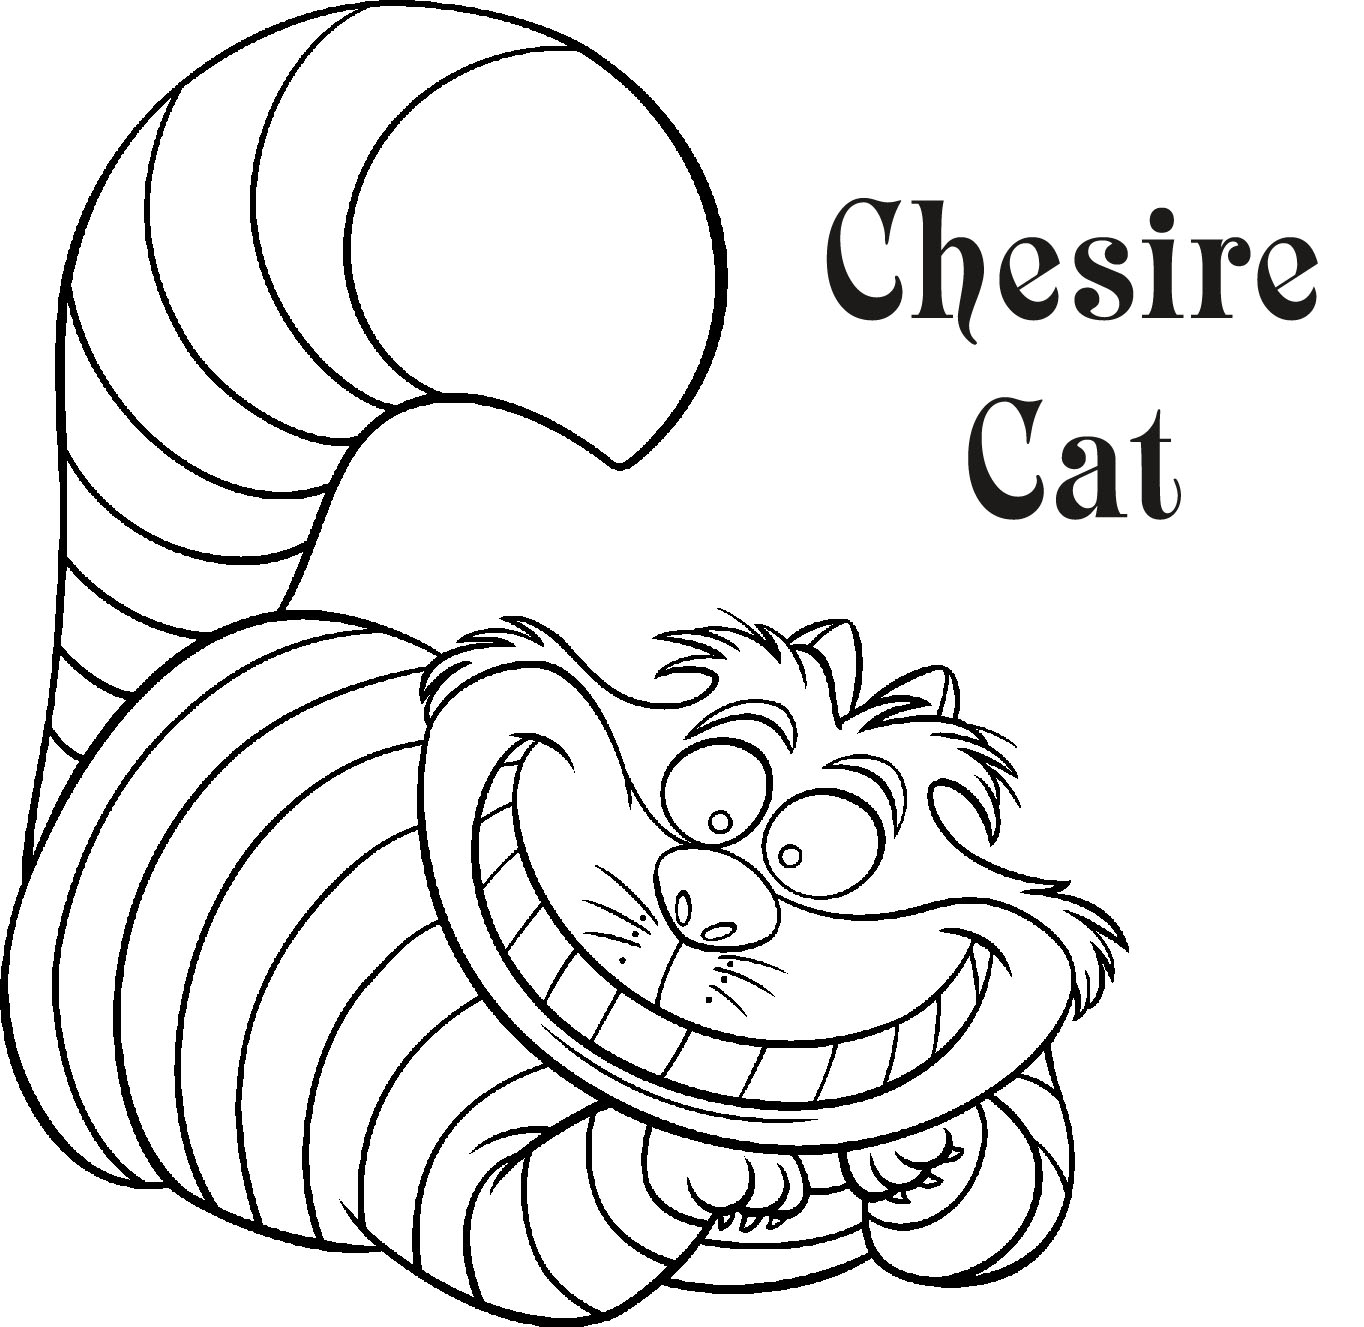 Cheshire Cat Coloring Page Coloring Home